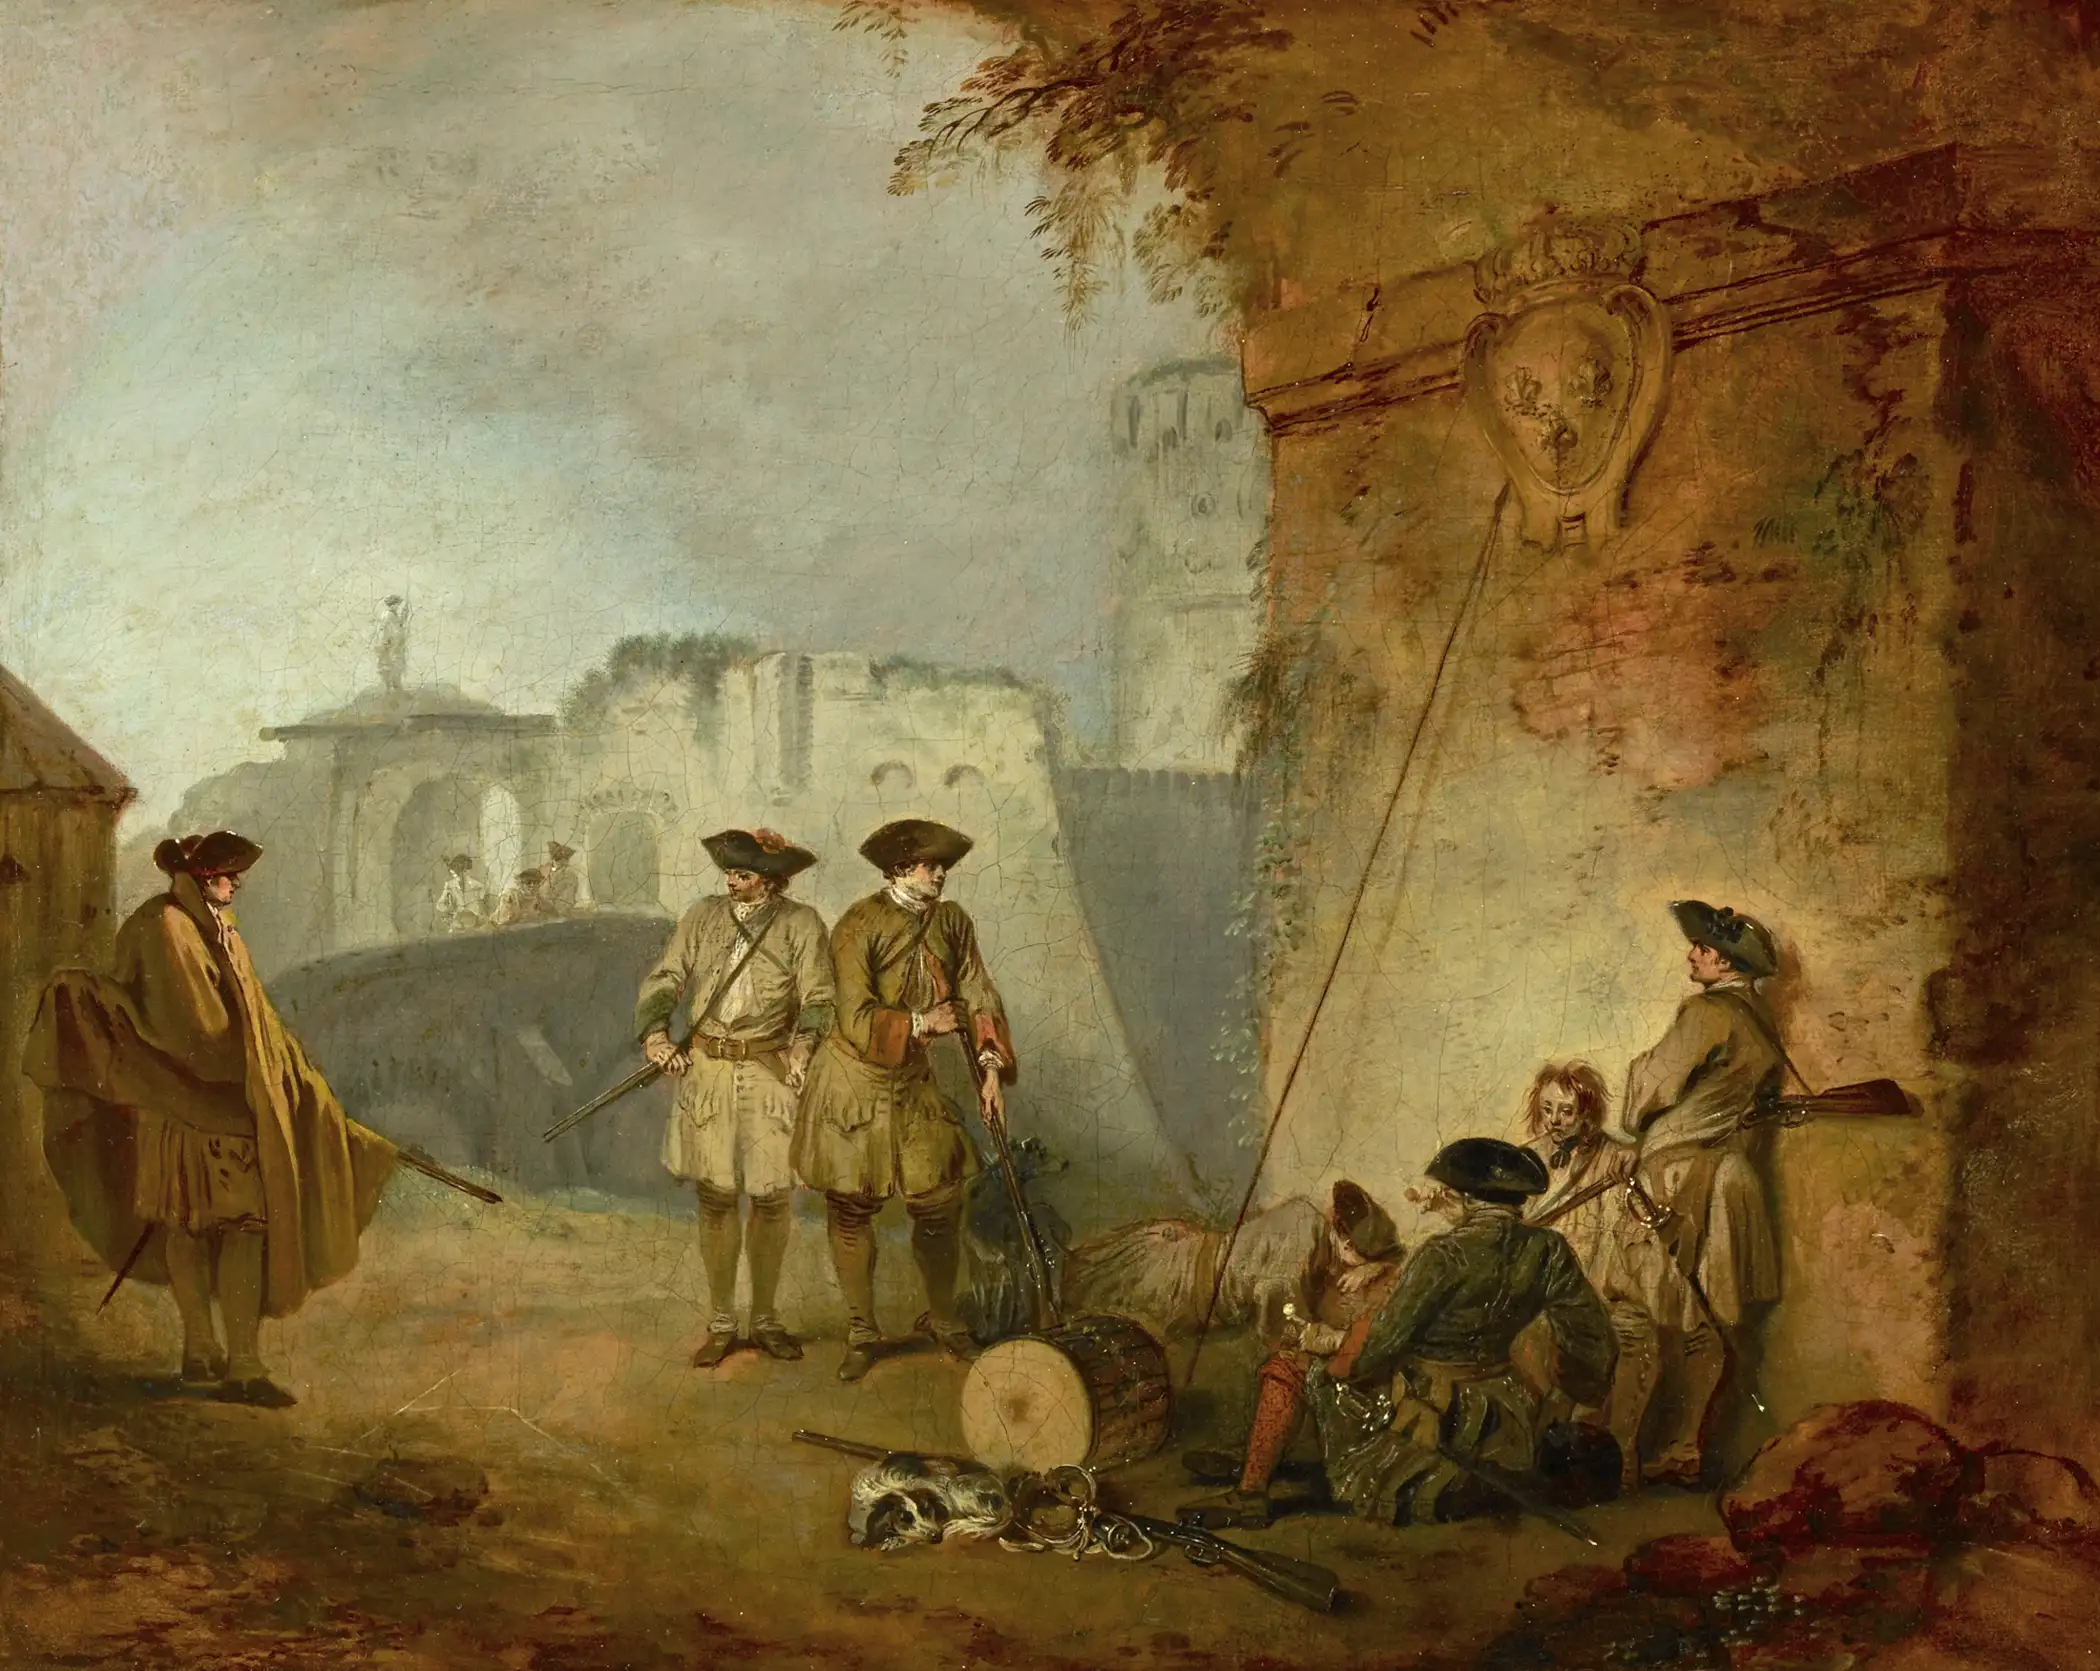 “The Portal of Calenciennes” by Jean-Antoine Watteau from the upcoming exhibition, “Watteau’s Soldiers: Scenes of Military Life in Eighteenth Century–France,” at The Frick Collection